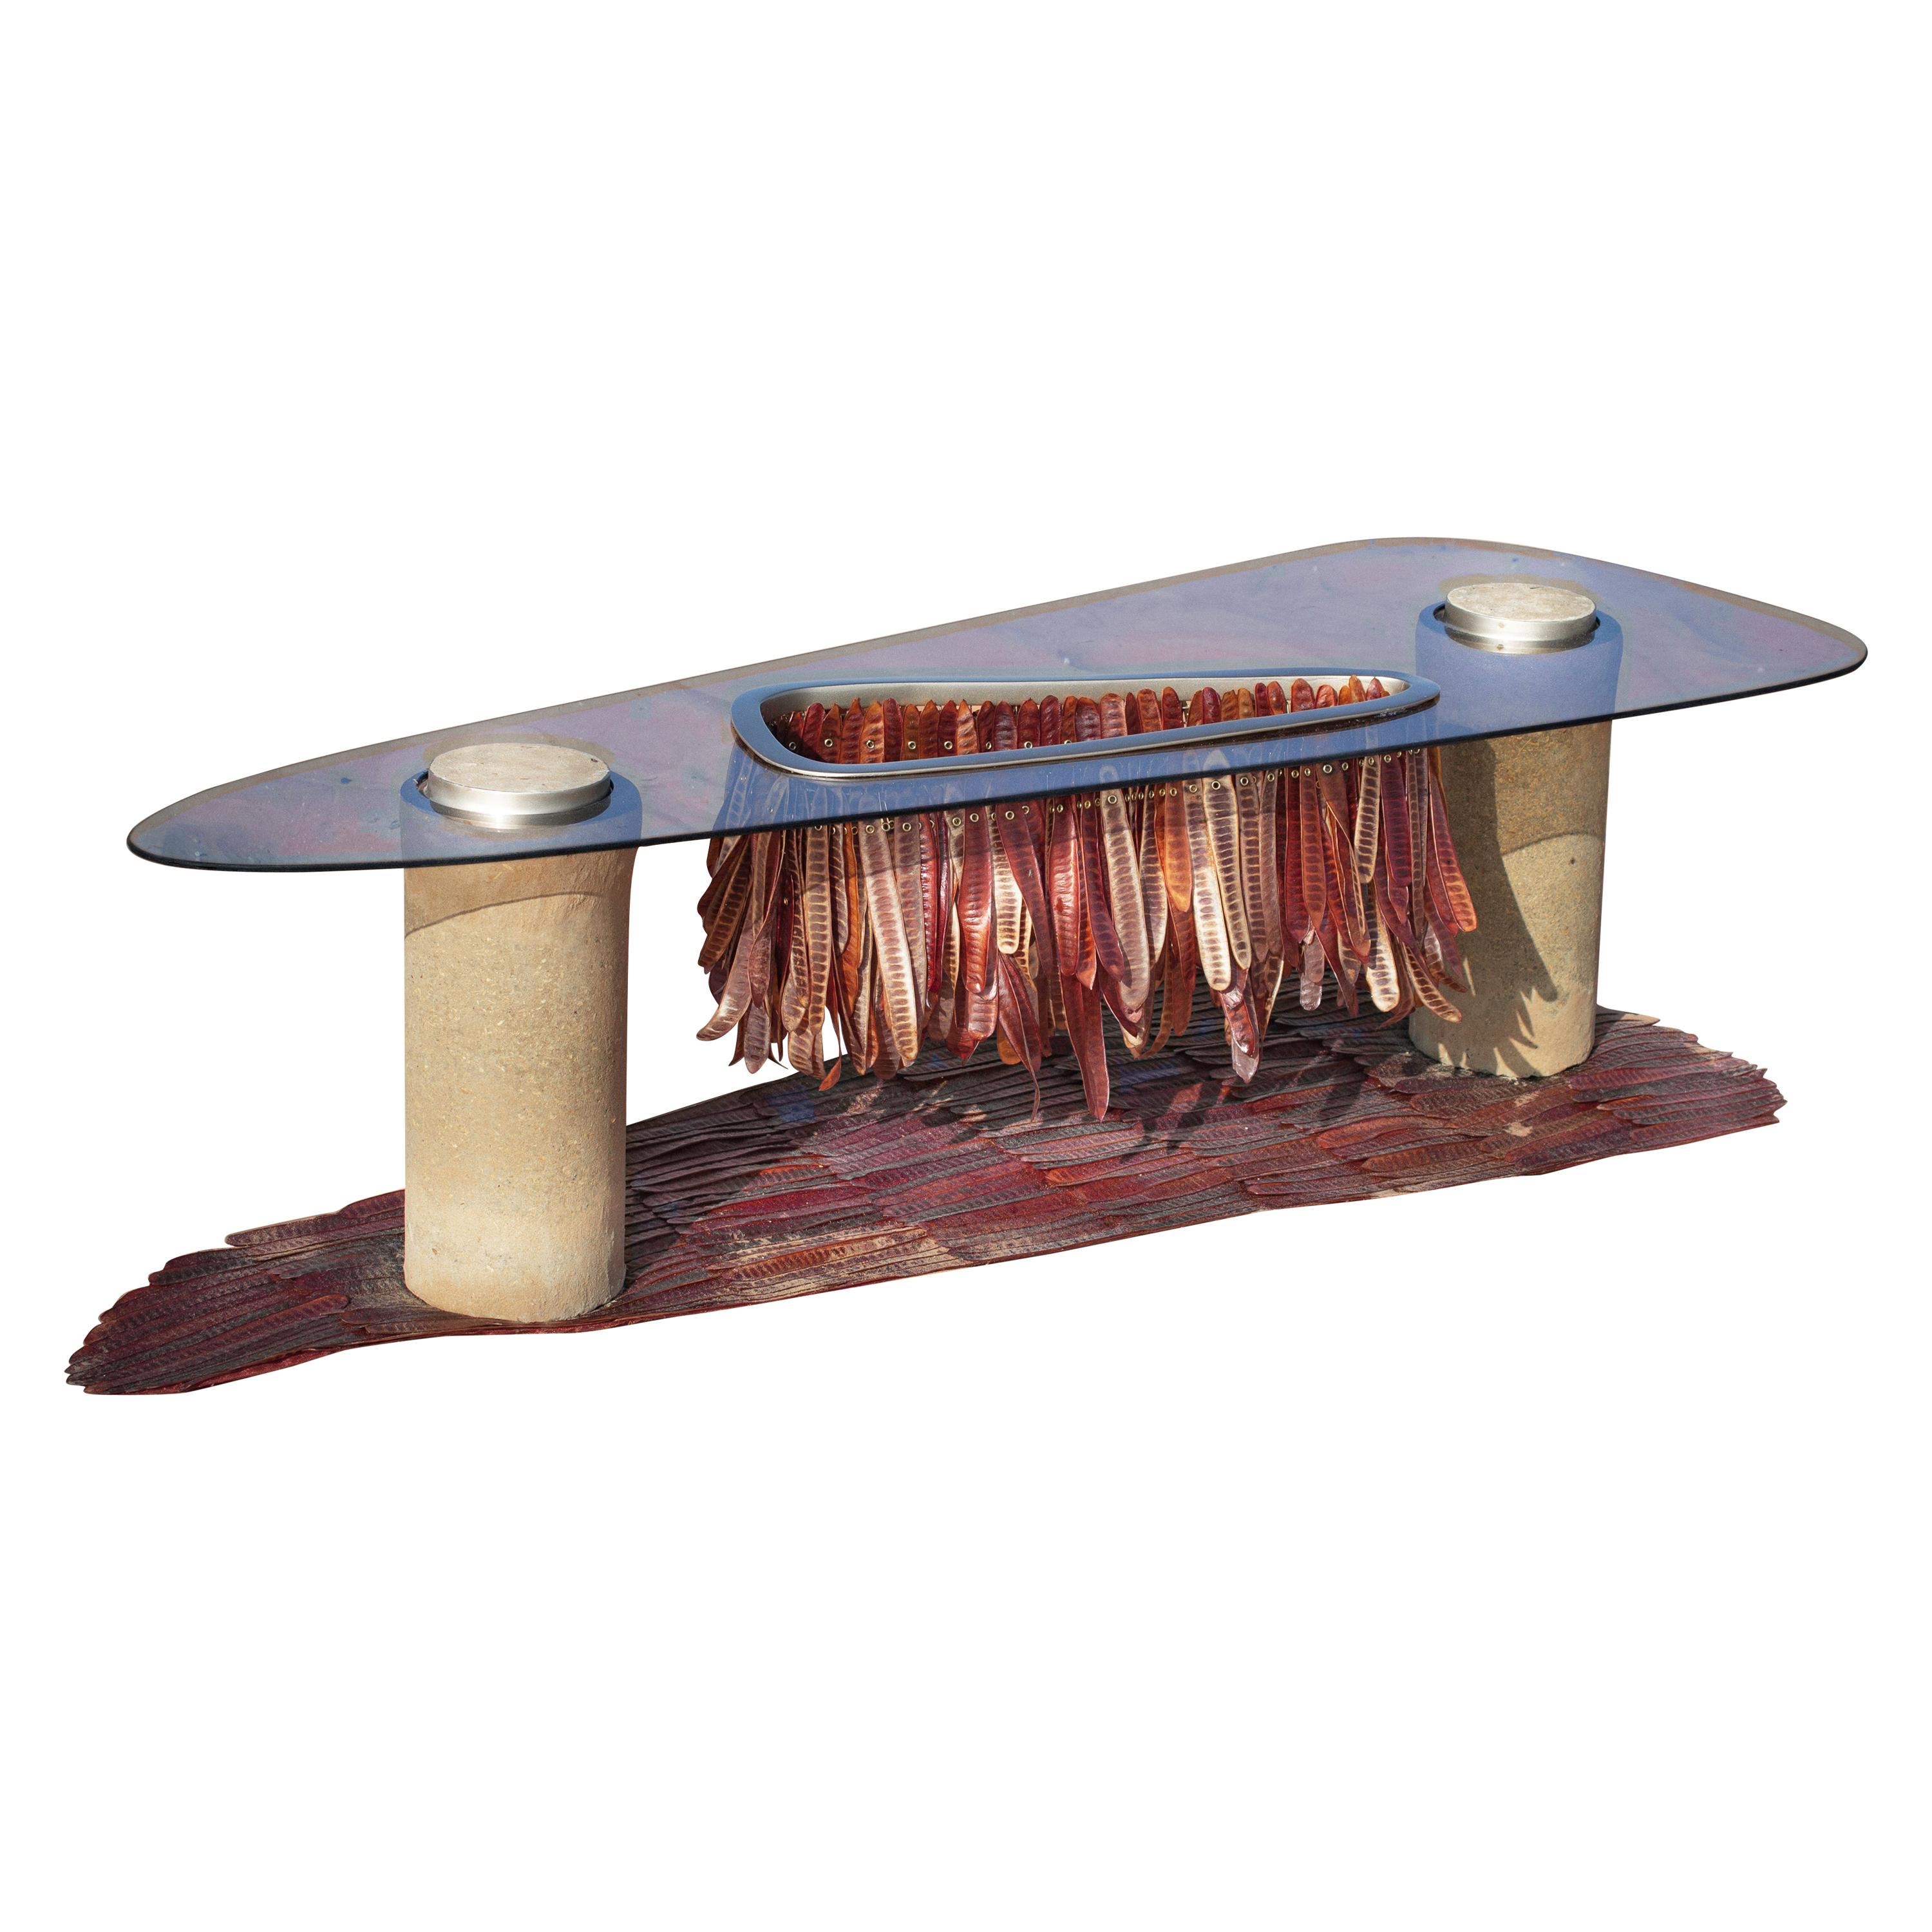 Seeds Middle Table by Nuhayr